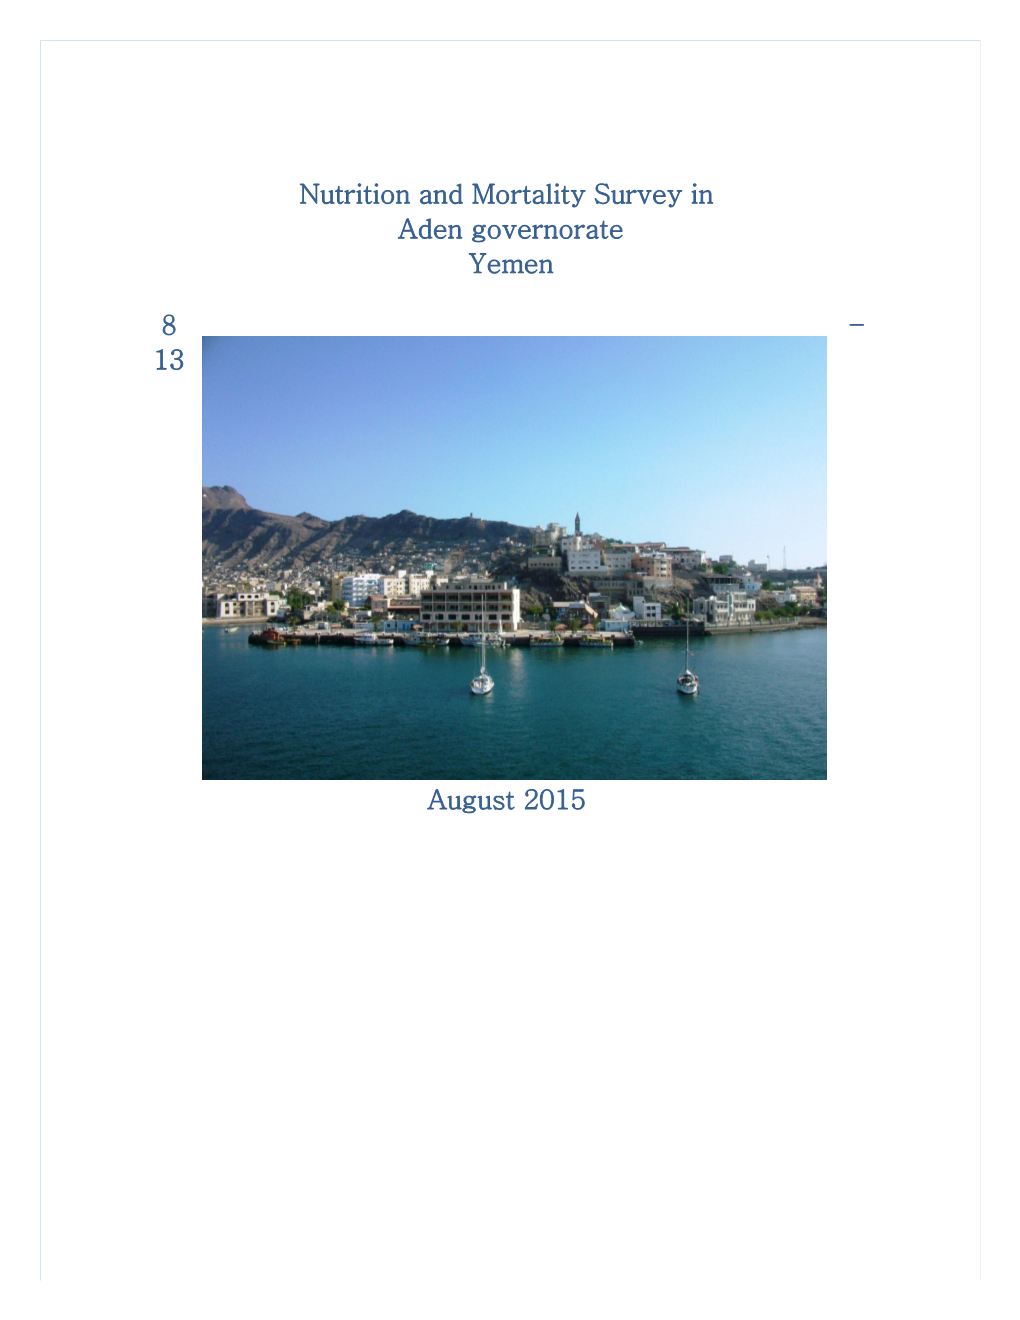 Nutritionand Mortality Survey In